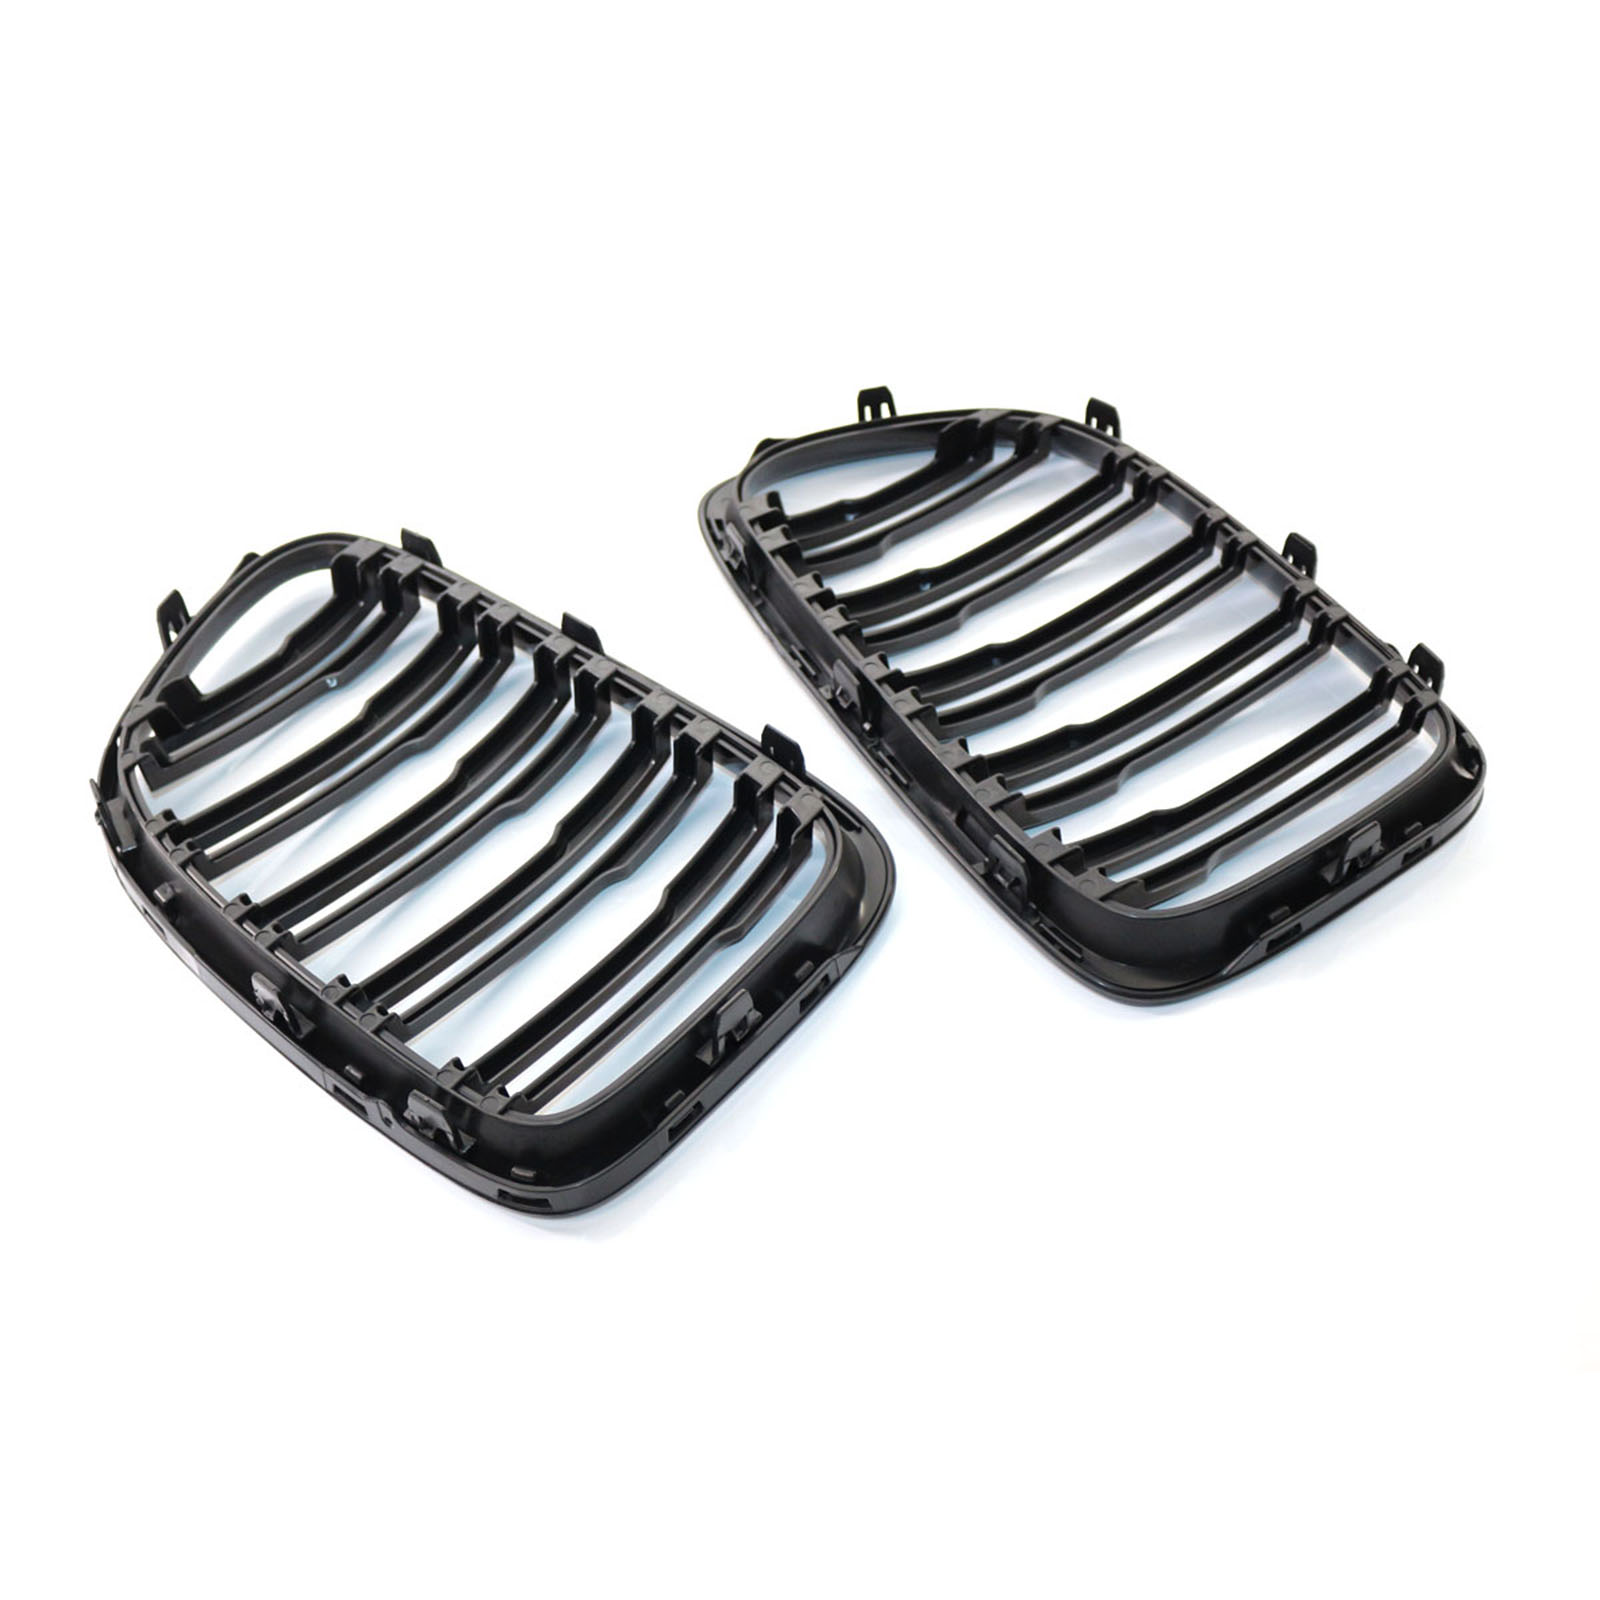 2x Front Grille Grill for BMW X1 E84 11-16 51117347669 Double Line Parts